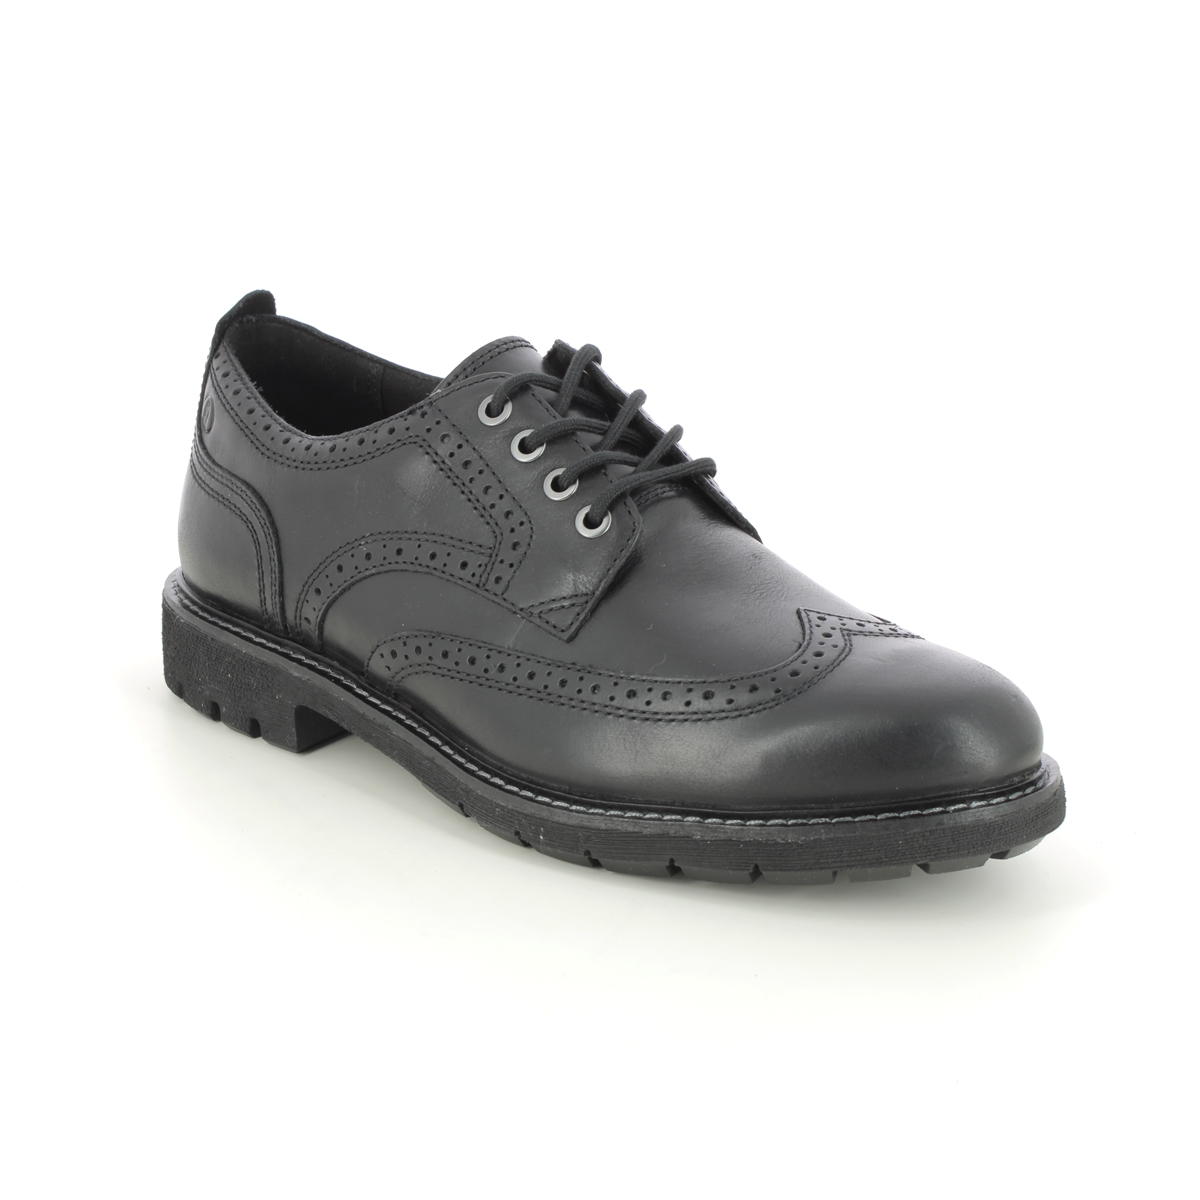 Clarks Batcombe Far Wing Black Leather Mens Brogues 734387G In Size 11 In Plain Black Leather G Width Fitting